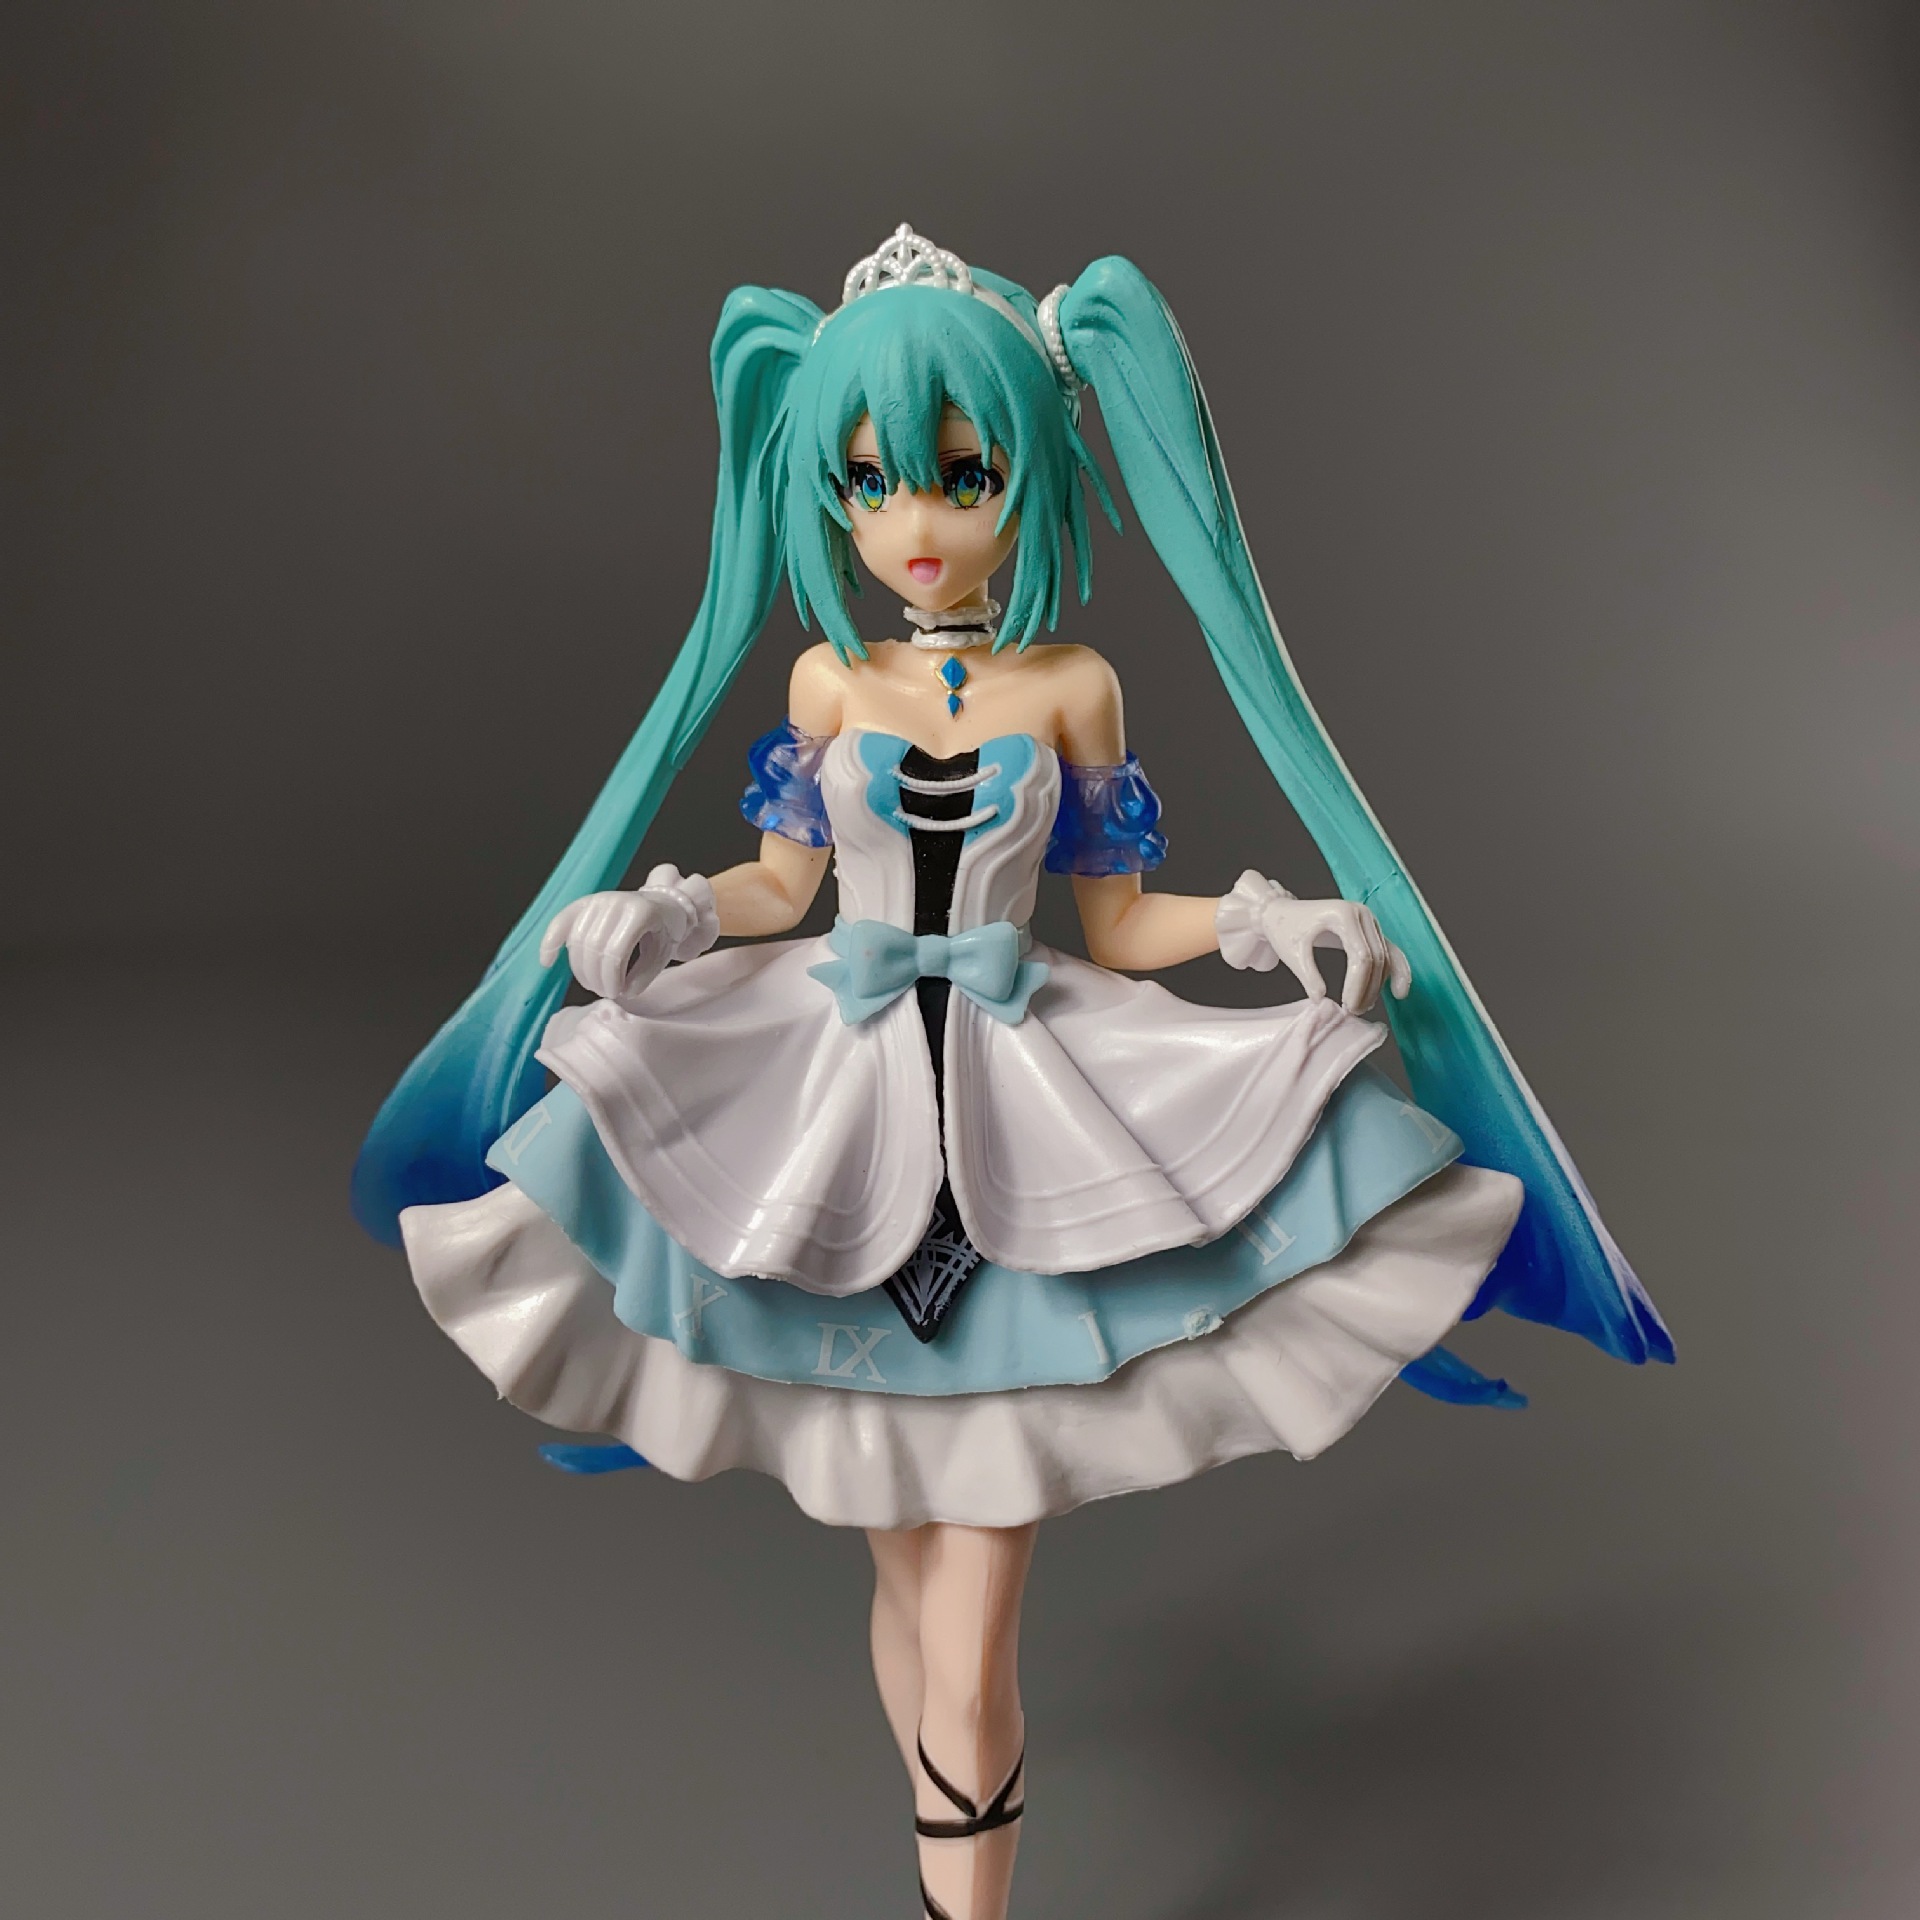 in Stock and Fast Delivery Hatsune Miku Prize Figure Cinderella Sleeping Beauty Fairy Tale Fairyland Girl Gift